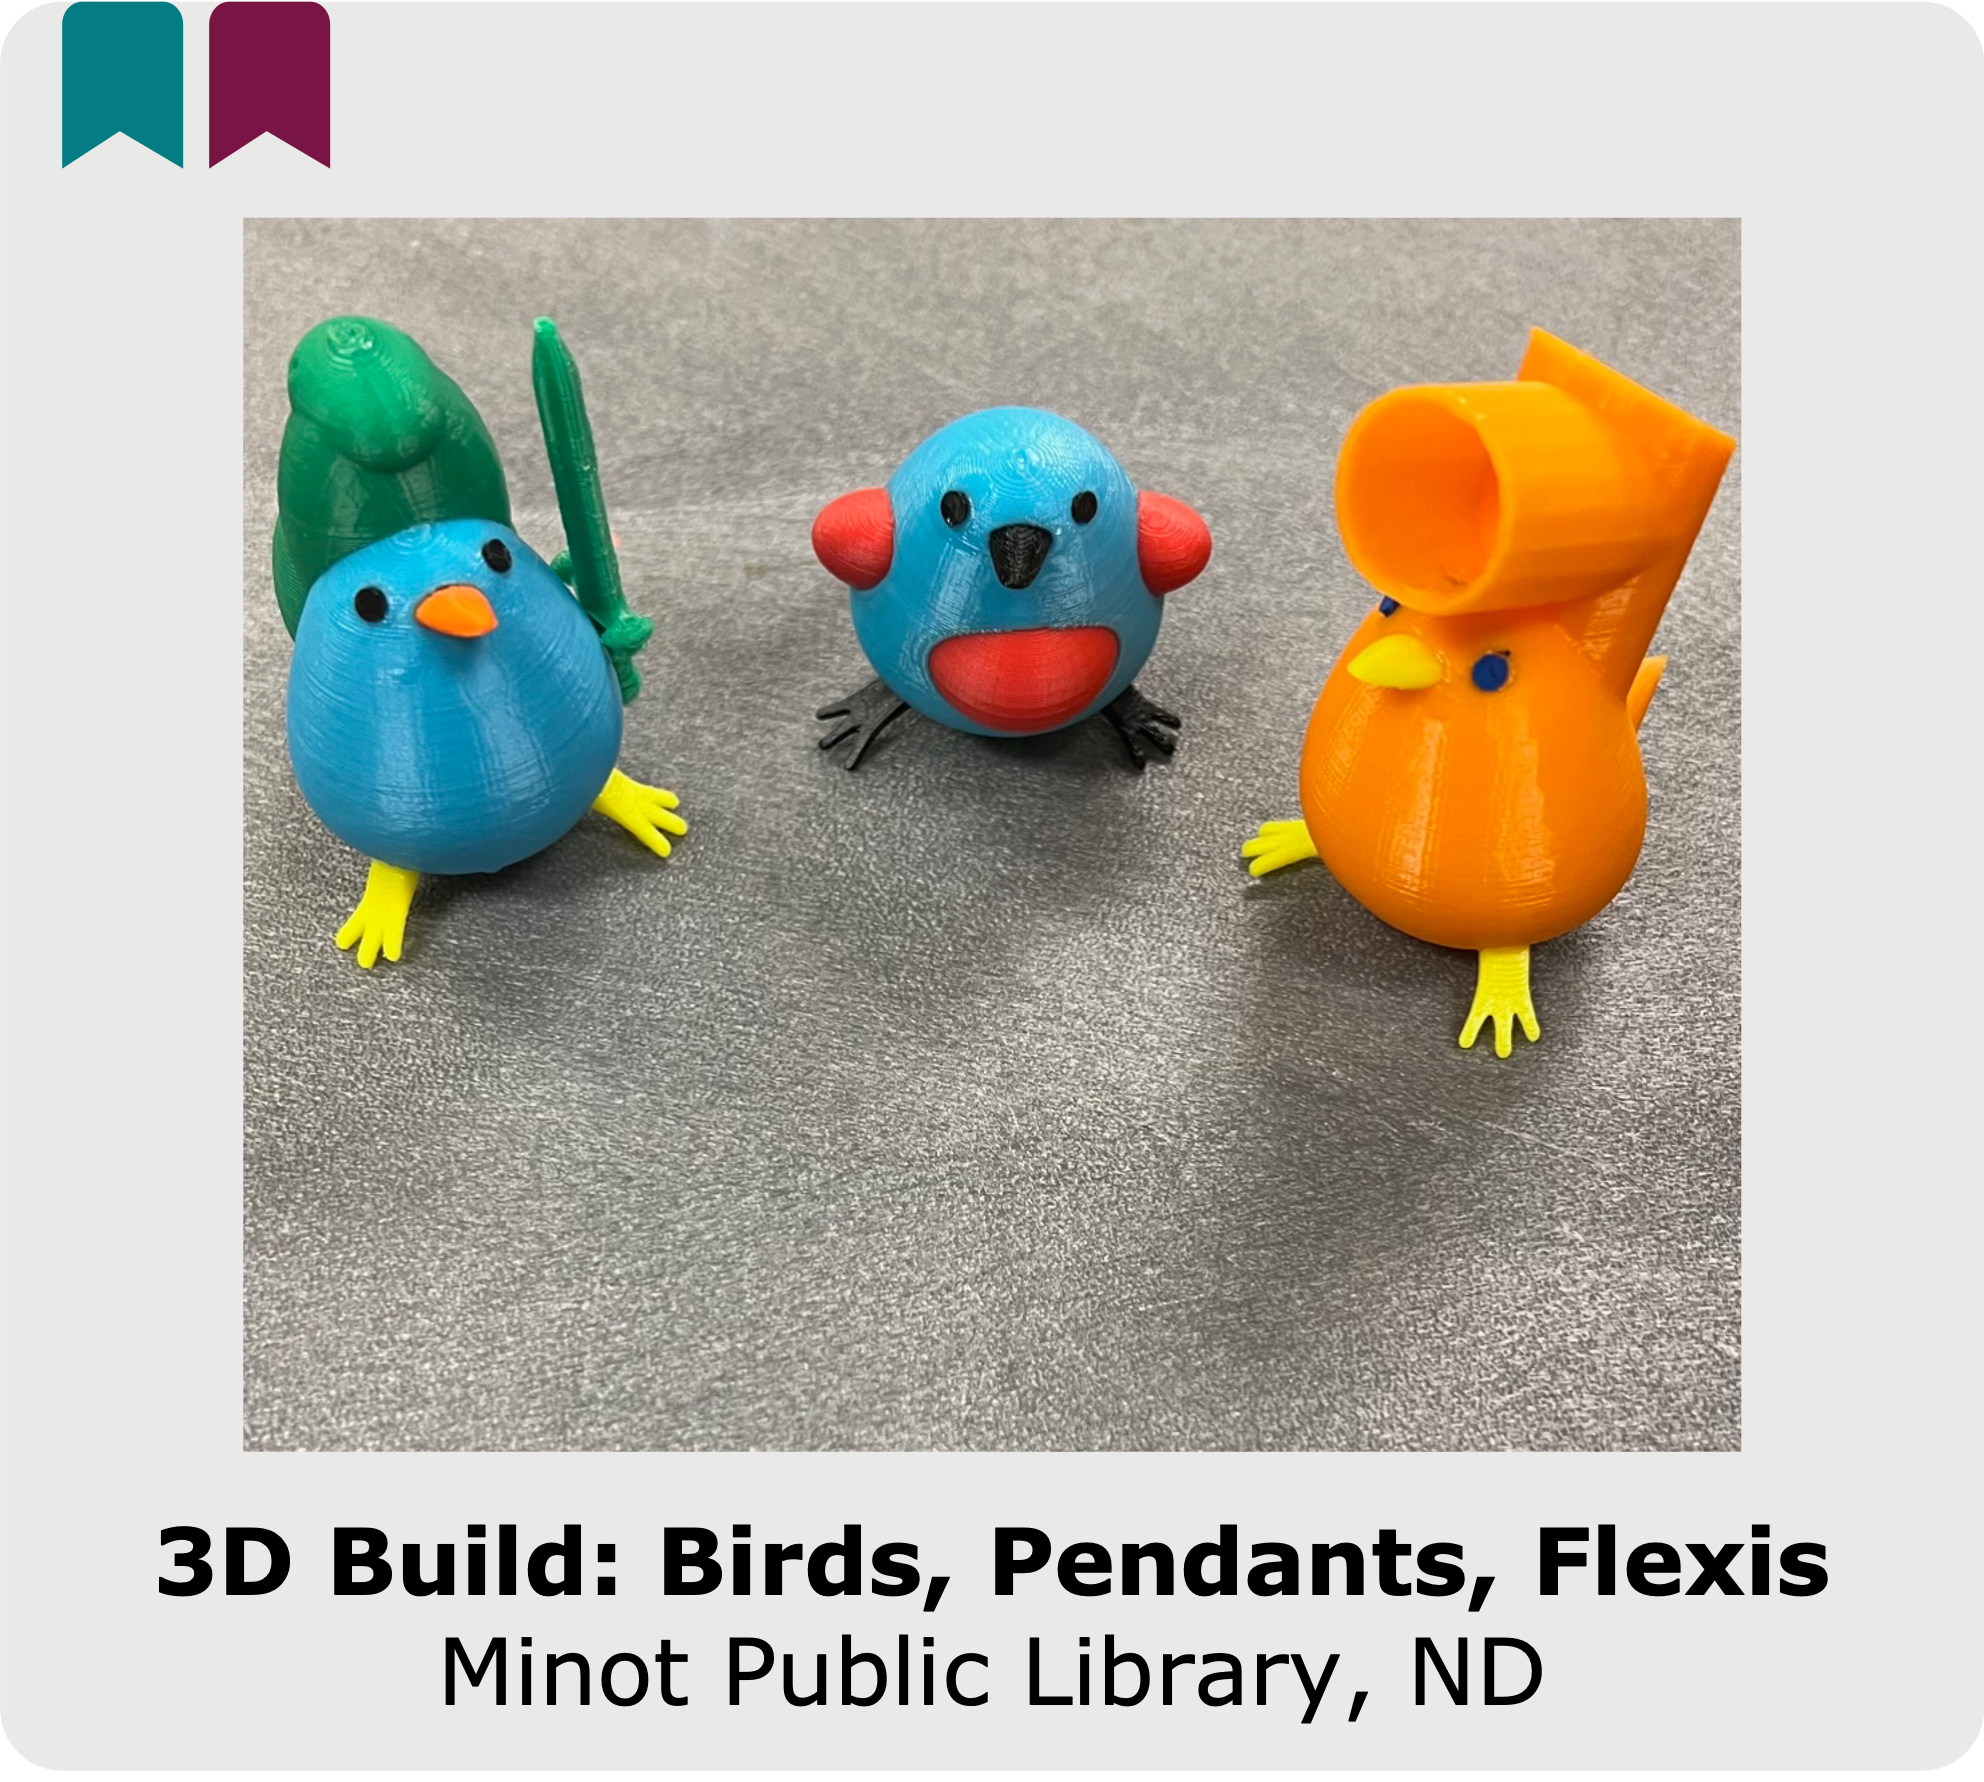 Click to open the case study of the 3D build program at Minot Public Library in North Dakota.